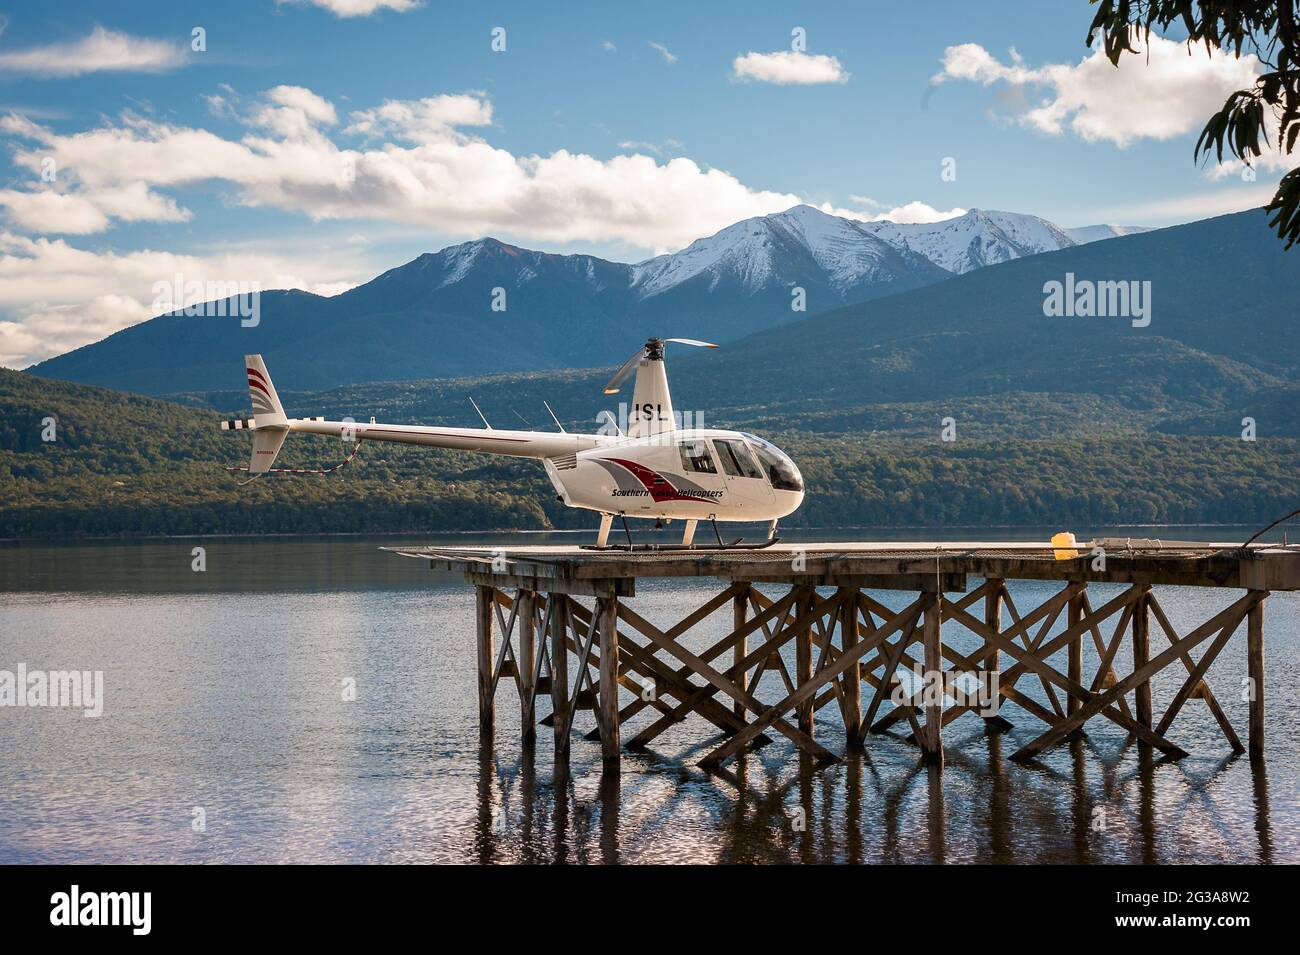 Tranquil scene, helicopter on a landing platform over a clear, calm lake with beautiful snow capped mountain background Stock Photo